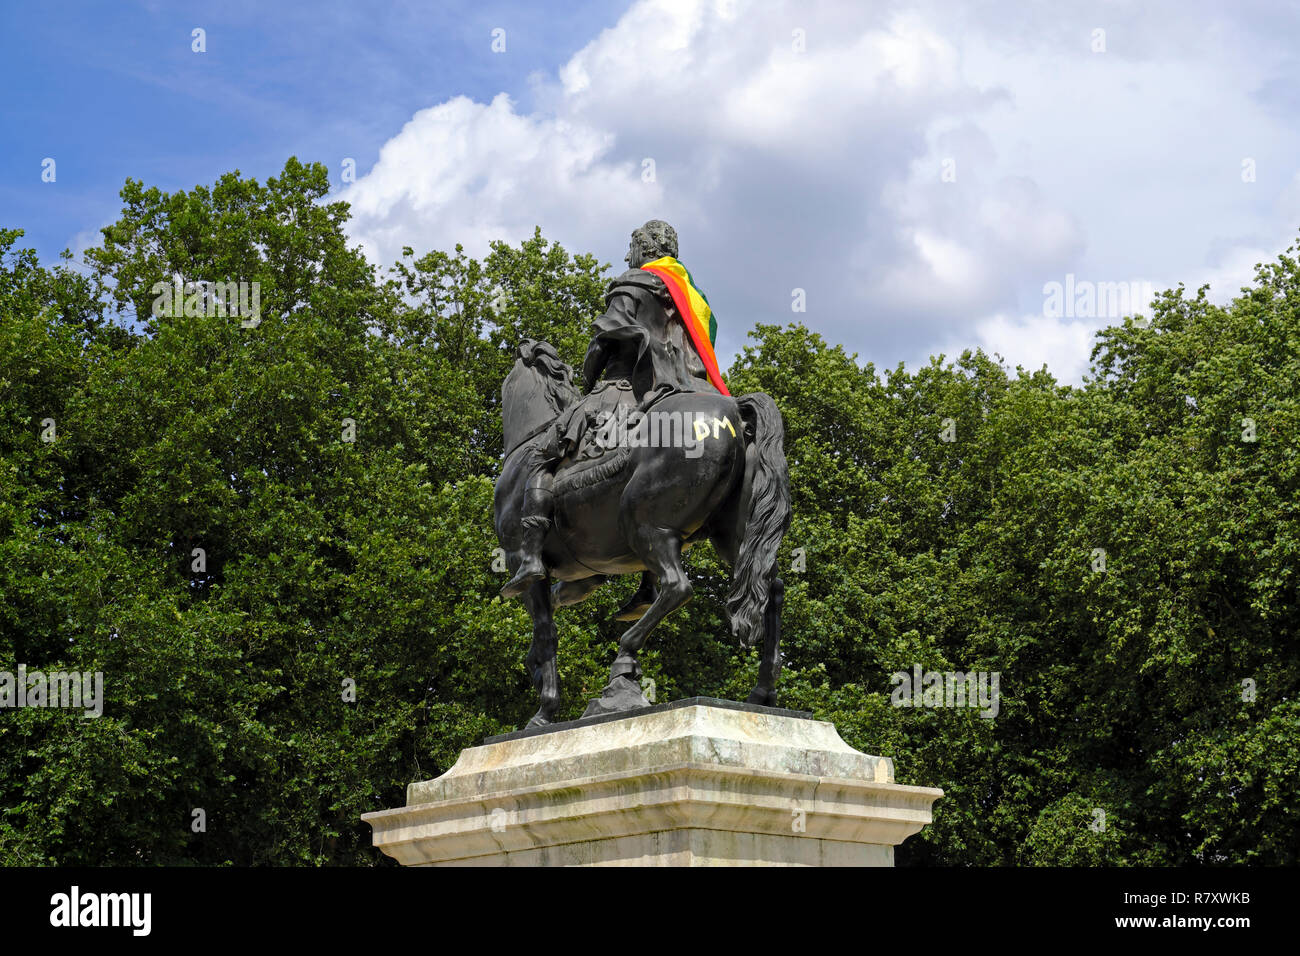 A statue of William III in Bristol, UK wears a Pride flag as a cloak during Bristol Pride 2017. Stock Photo